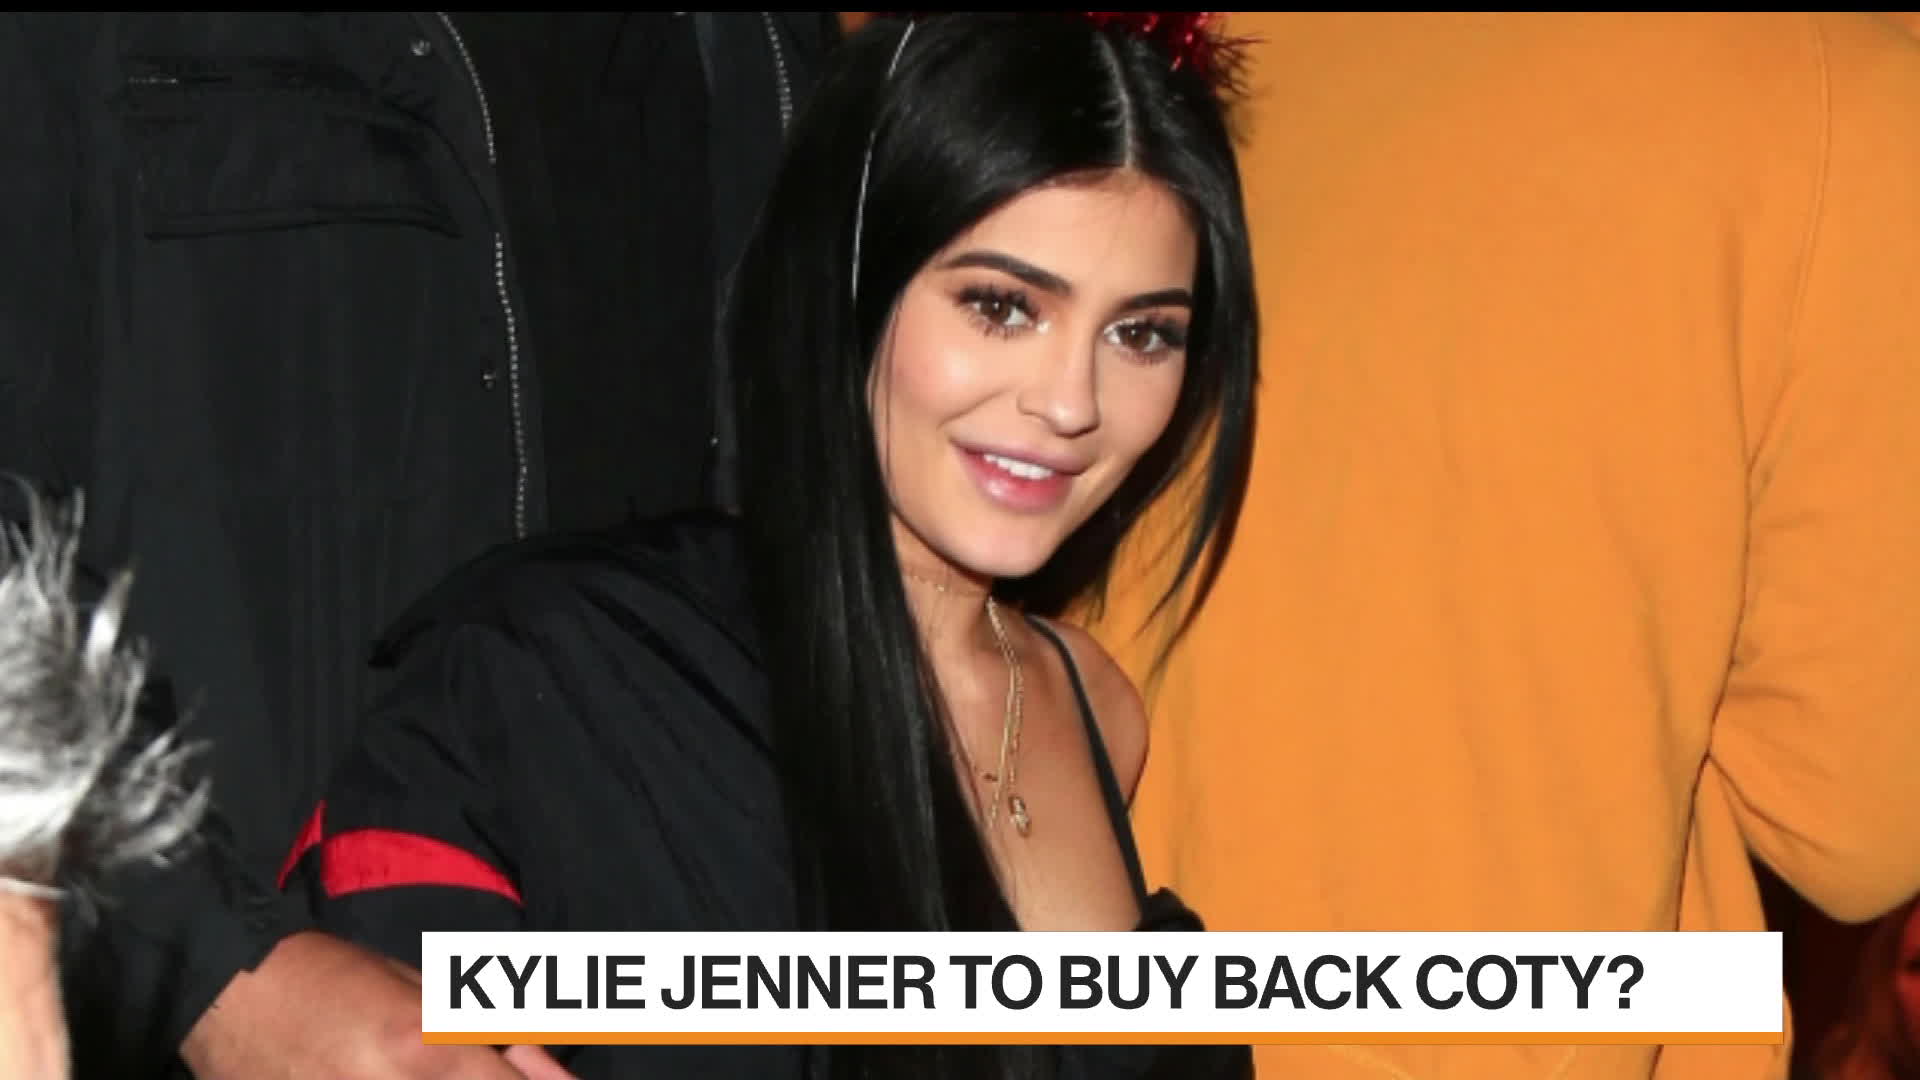 kylie jenner - Page 2 of 8 - The Daily Dot